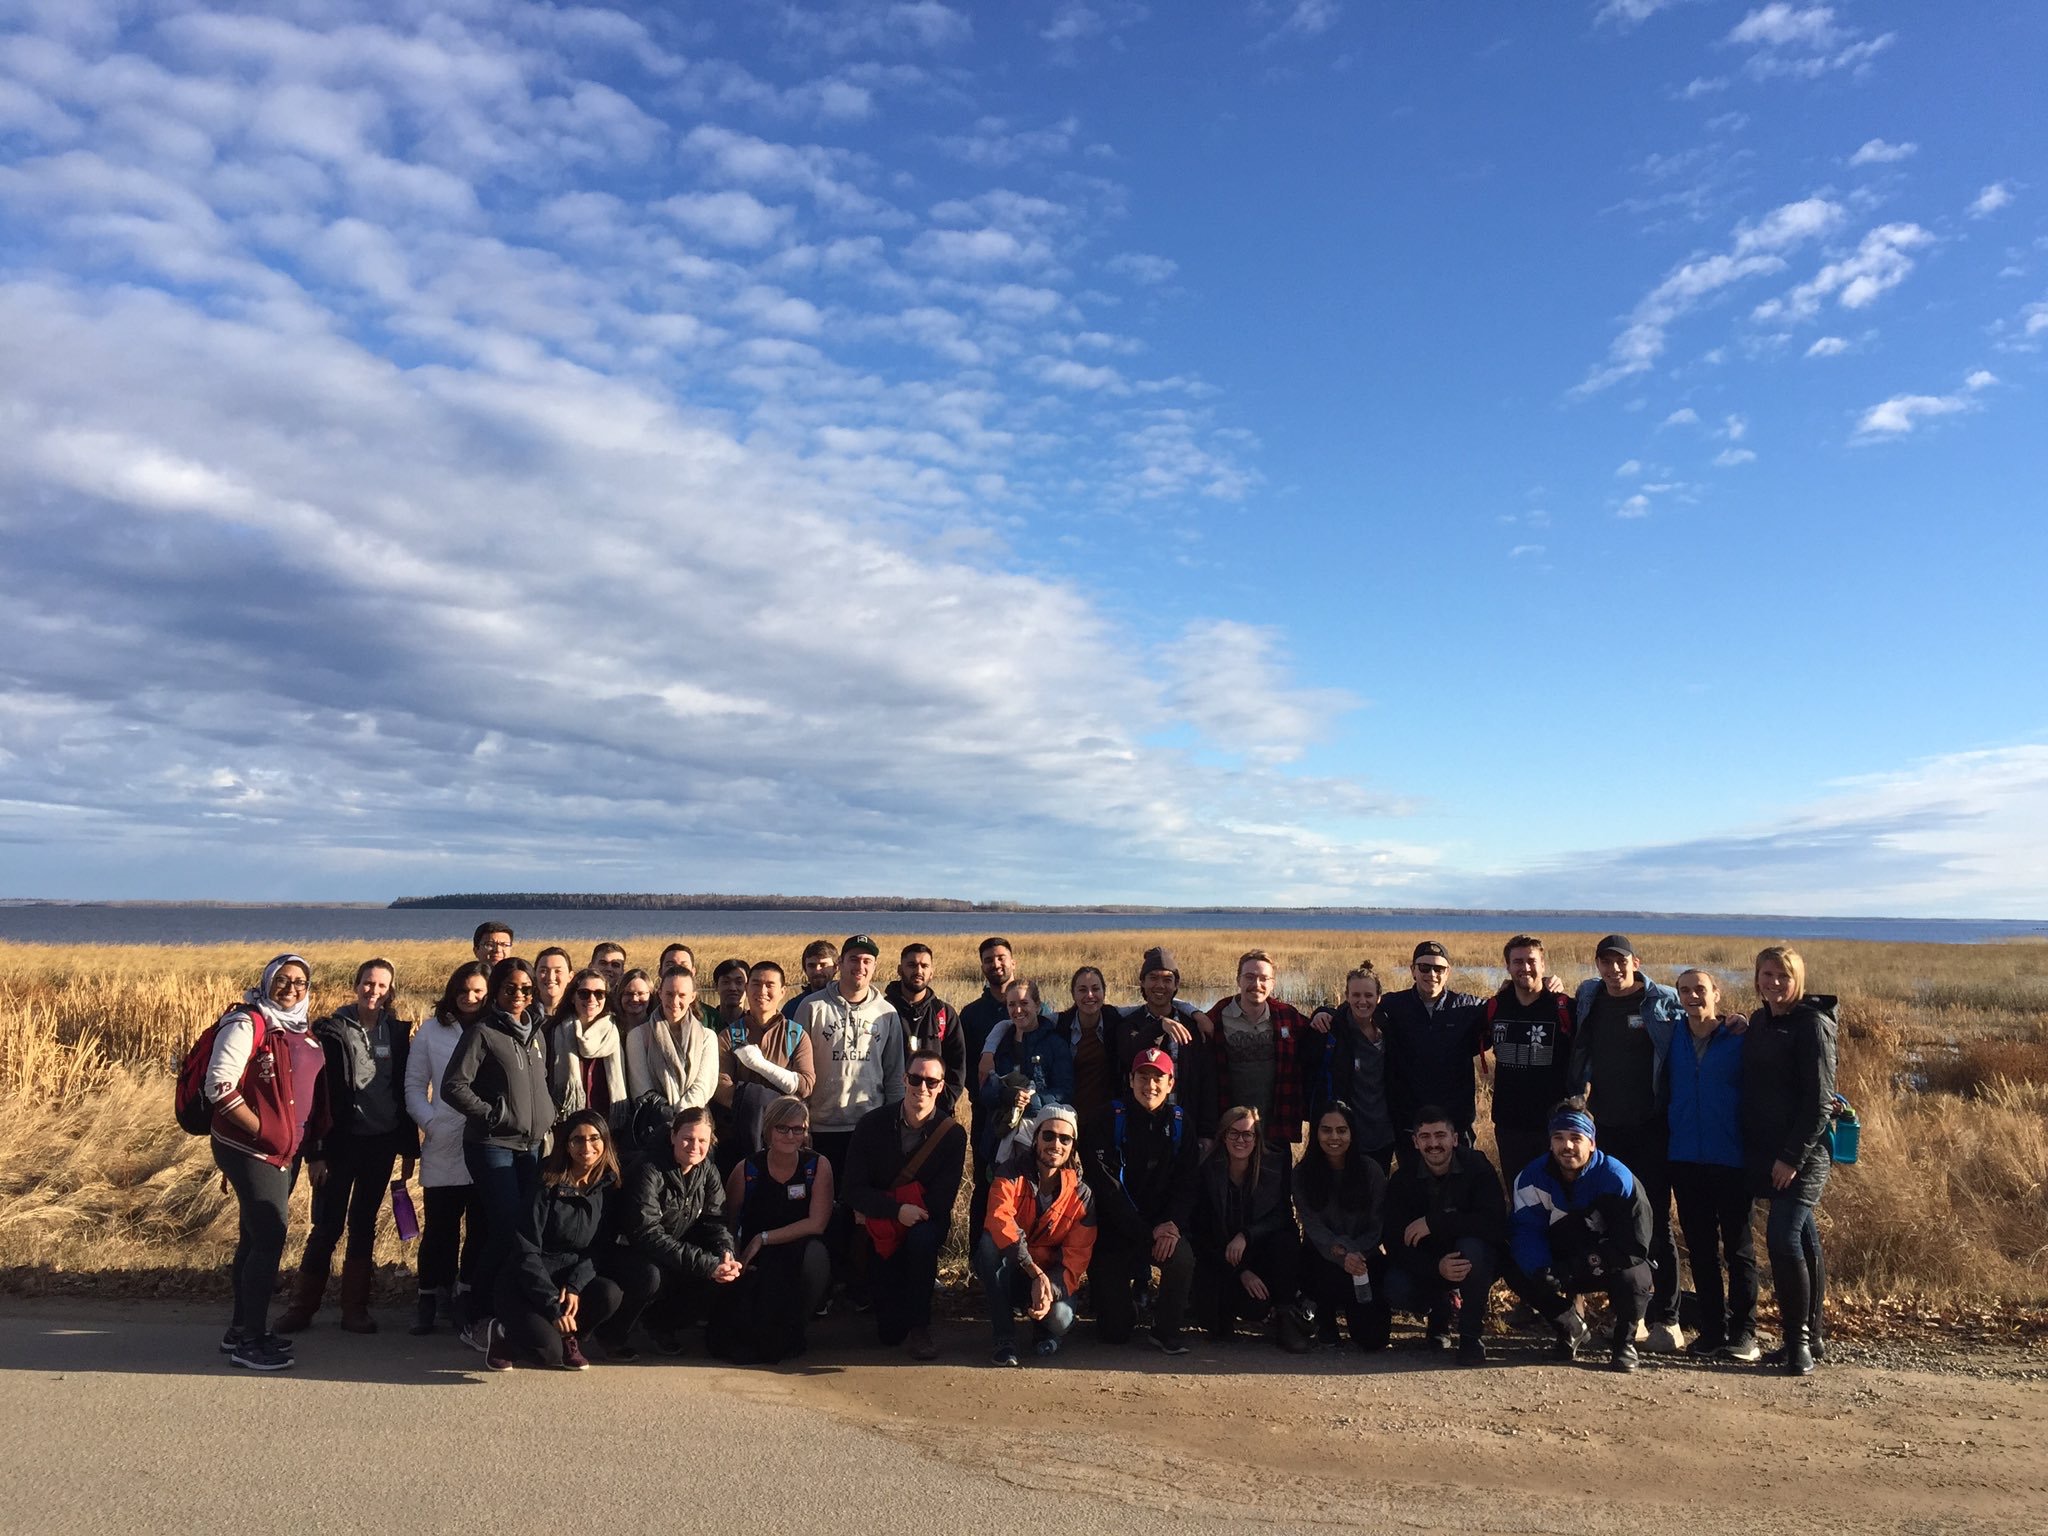 Corey Ziegler was one of a group of medical students that were part of a recent #SMARoadmap trip to northern Saskatchewan communities to learn more about rural and remote health care. (Photo via Saskatchewan Medical Association on Twitter.)